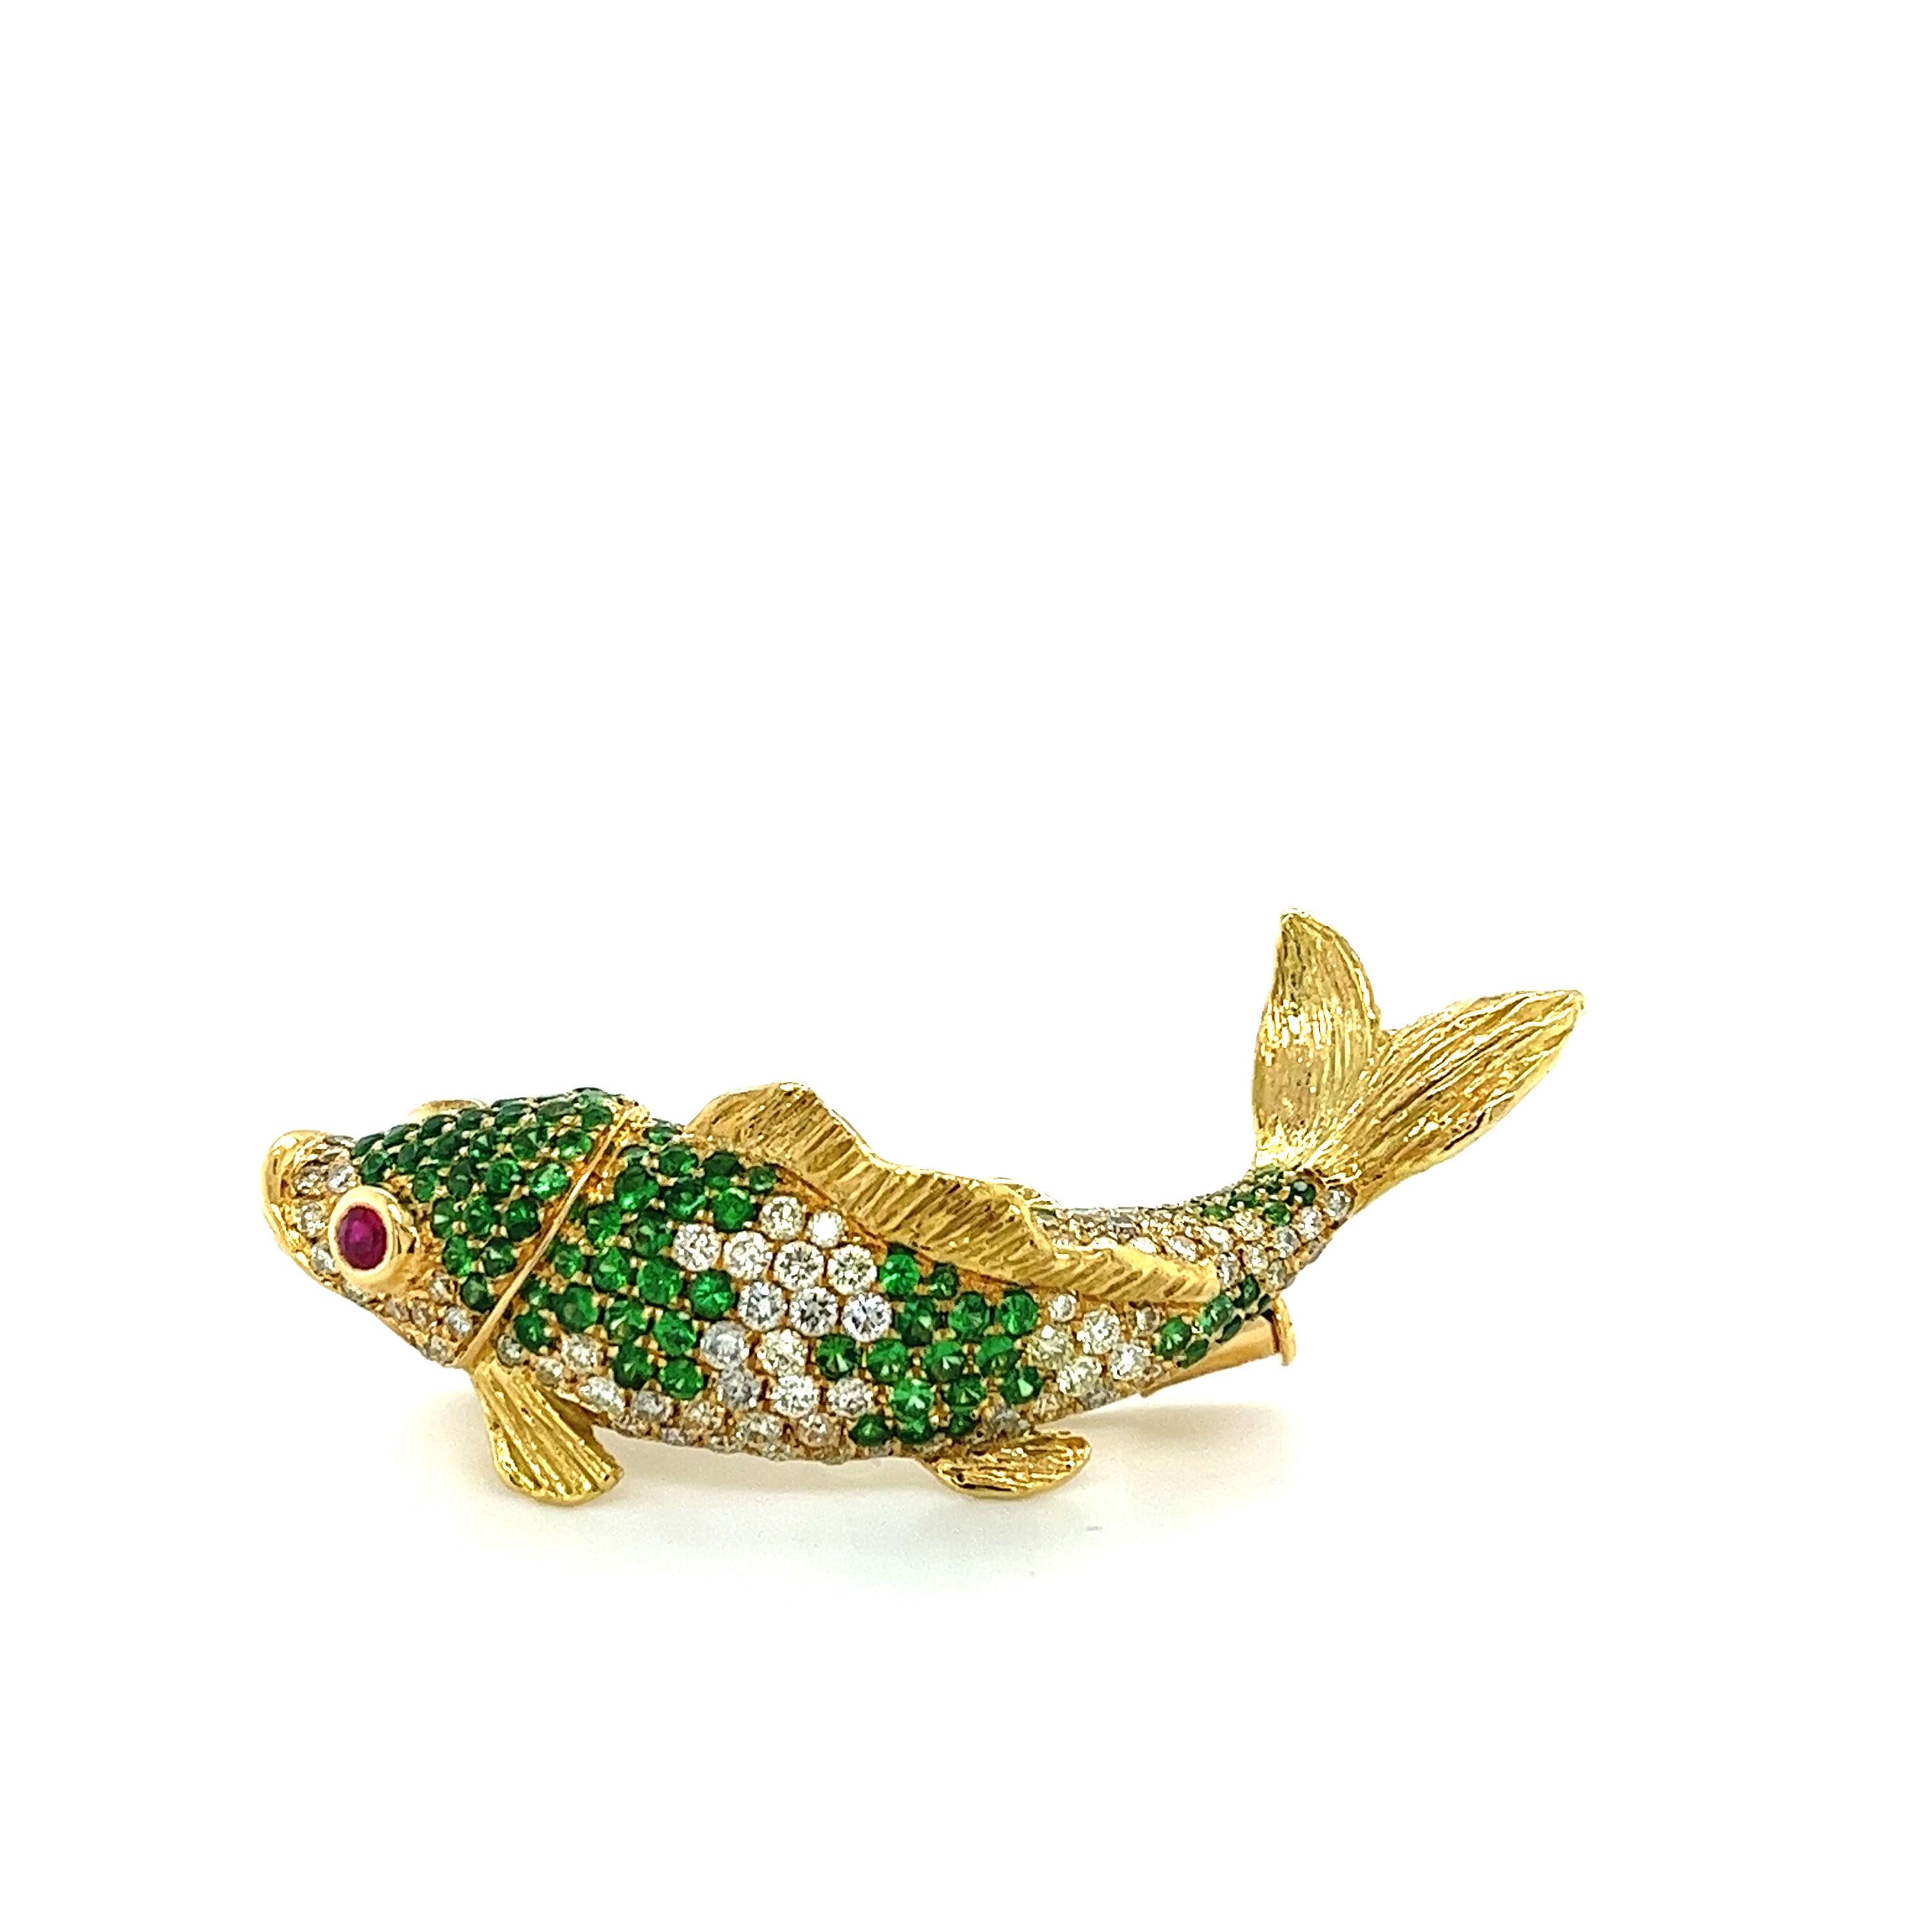 Fancy Diamond & Ruby Fish 18K Rose Gold Brooch

16 Fancy Diamonds 1.50 CT
111 Green Garnet 1.81 CT
2 Rubies 0.16 CT
18K Rose Gold 11.96 GM

The pomegranate stone of Garnet gleams with a dark red luster that instantly stirs the soul. This precious